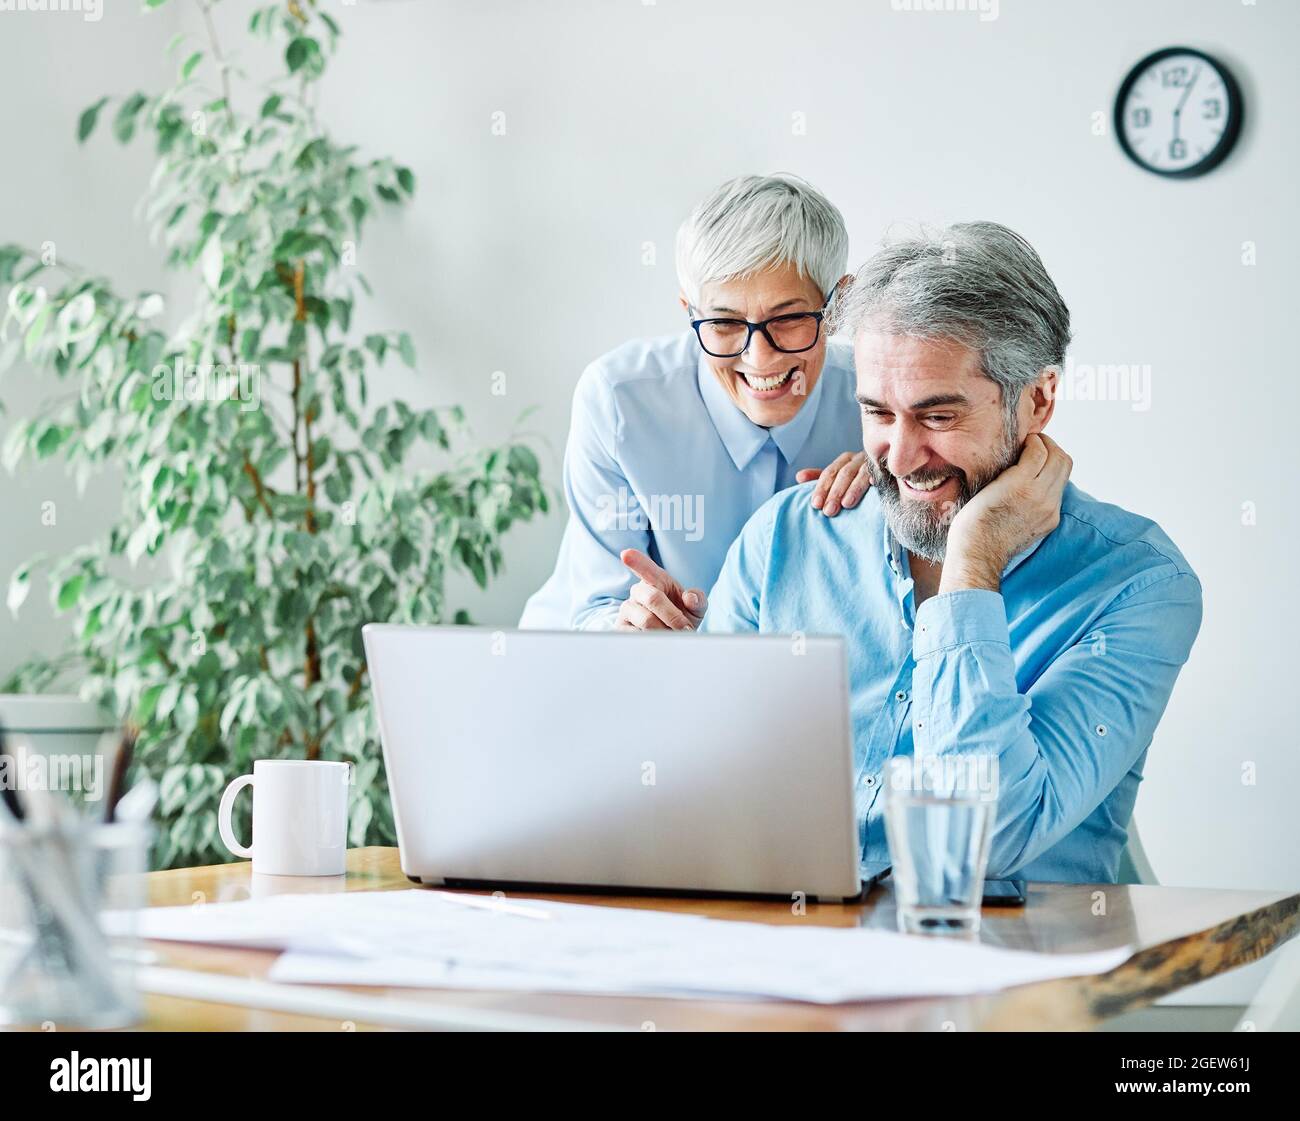 business office person discussion laptop teamwork senior meeting Stock Photo